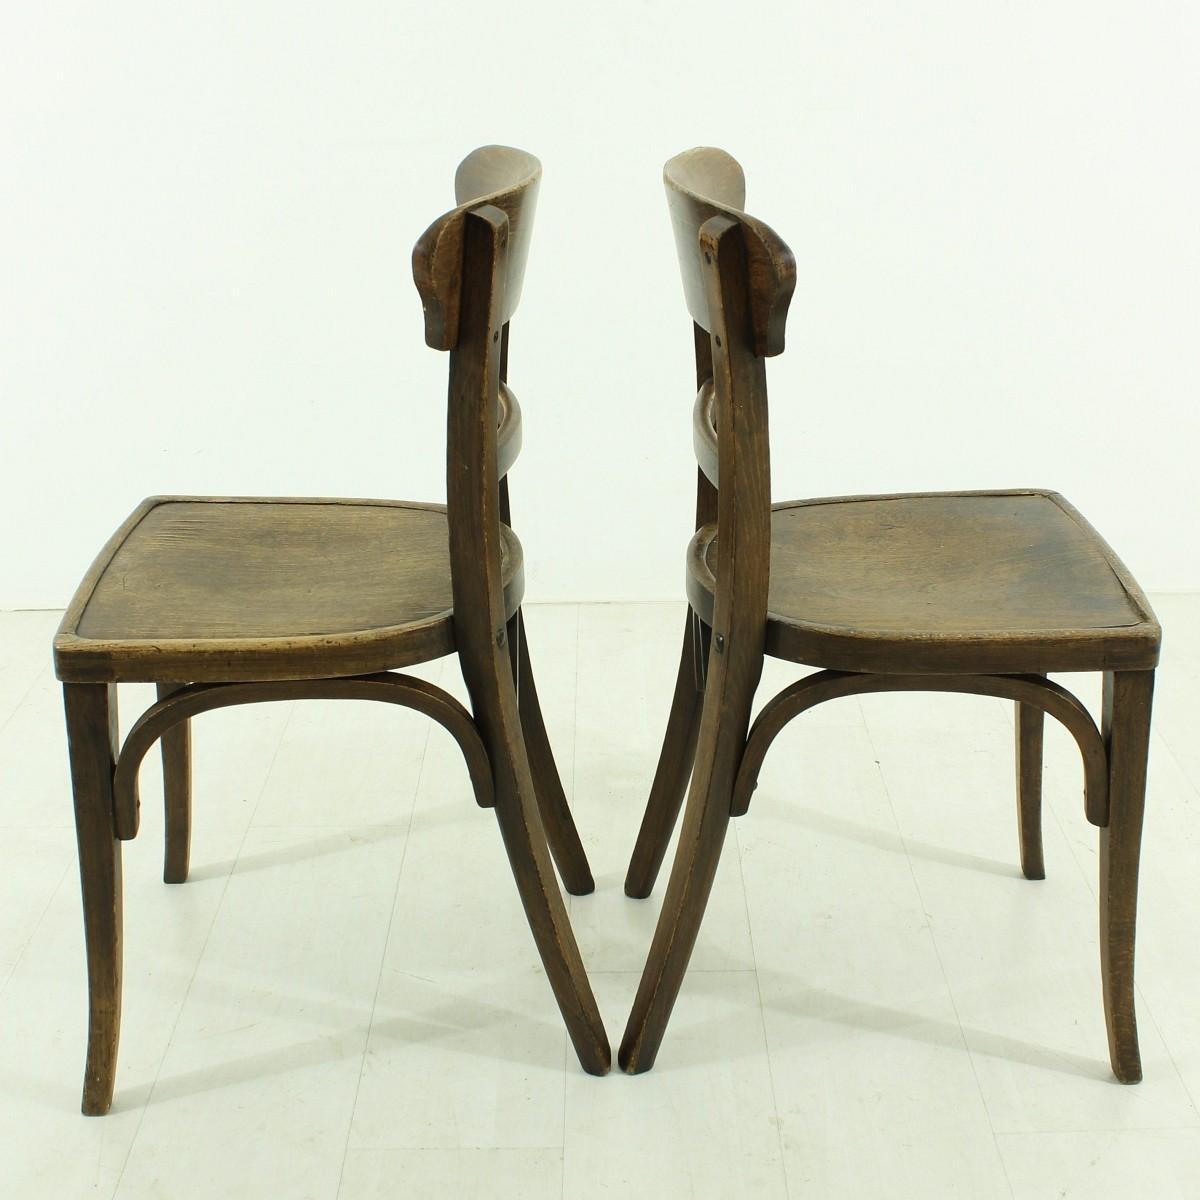 Mid-20th Century Antique Set of Two Tavern Chairs, circa 1930s